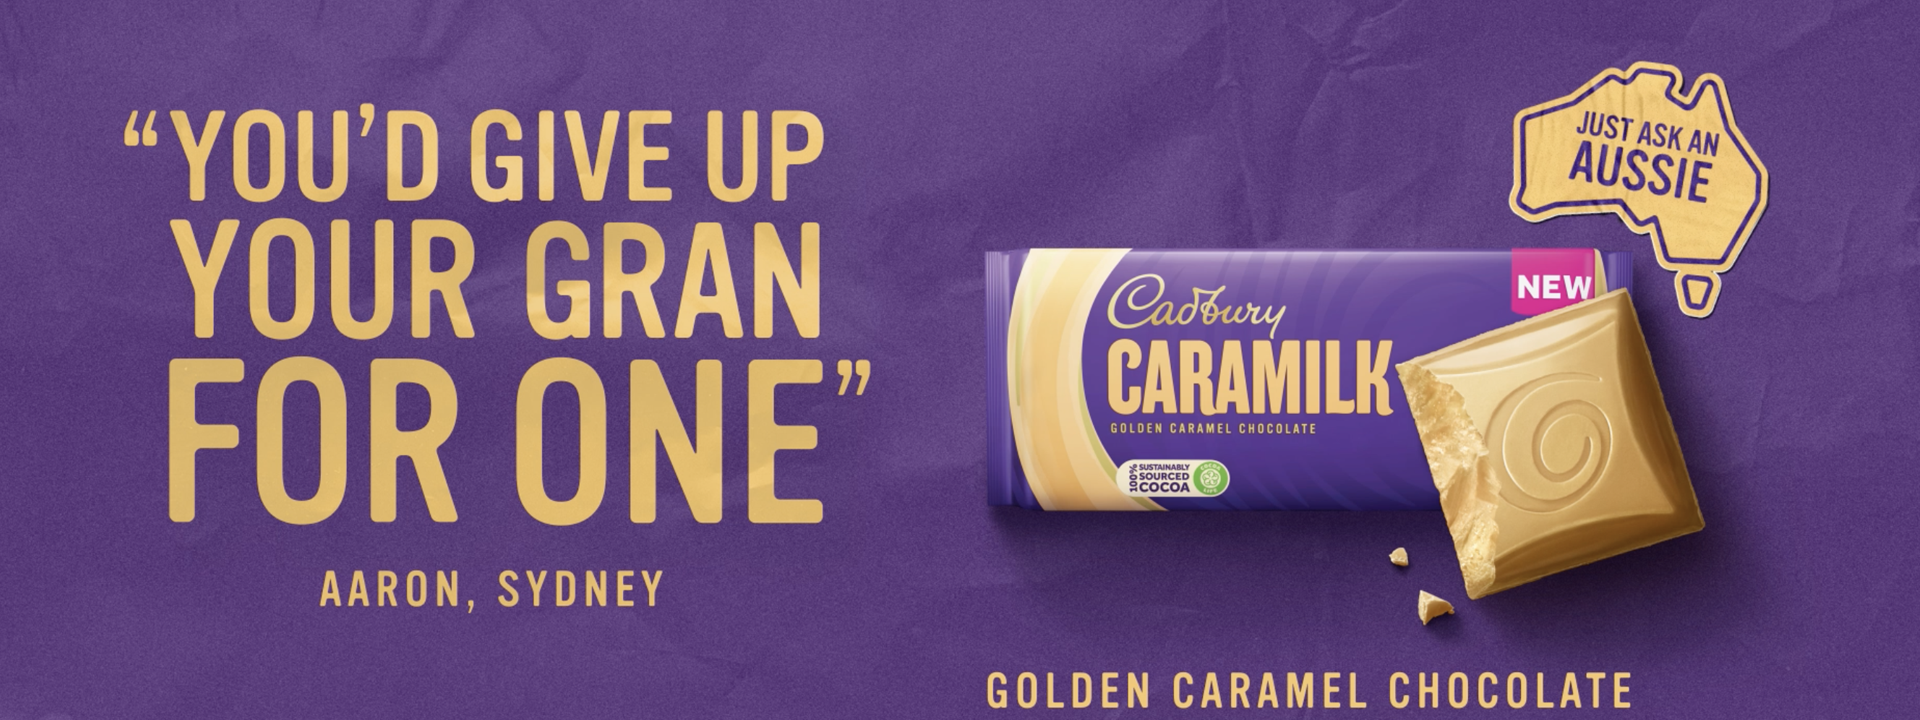 On the right, an image of Caramilk bar with wrapper on. On the left is a quote saying "You'd give up your Gran for one."